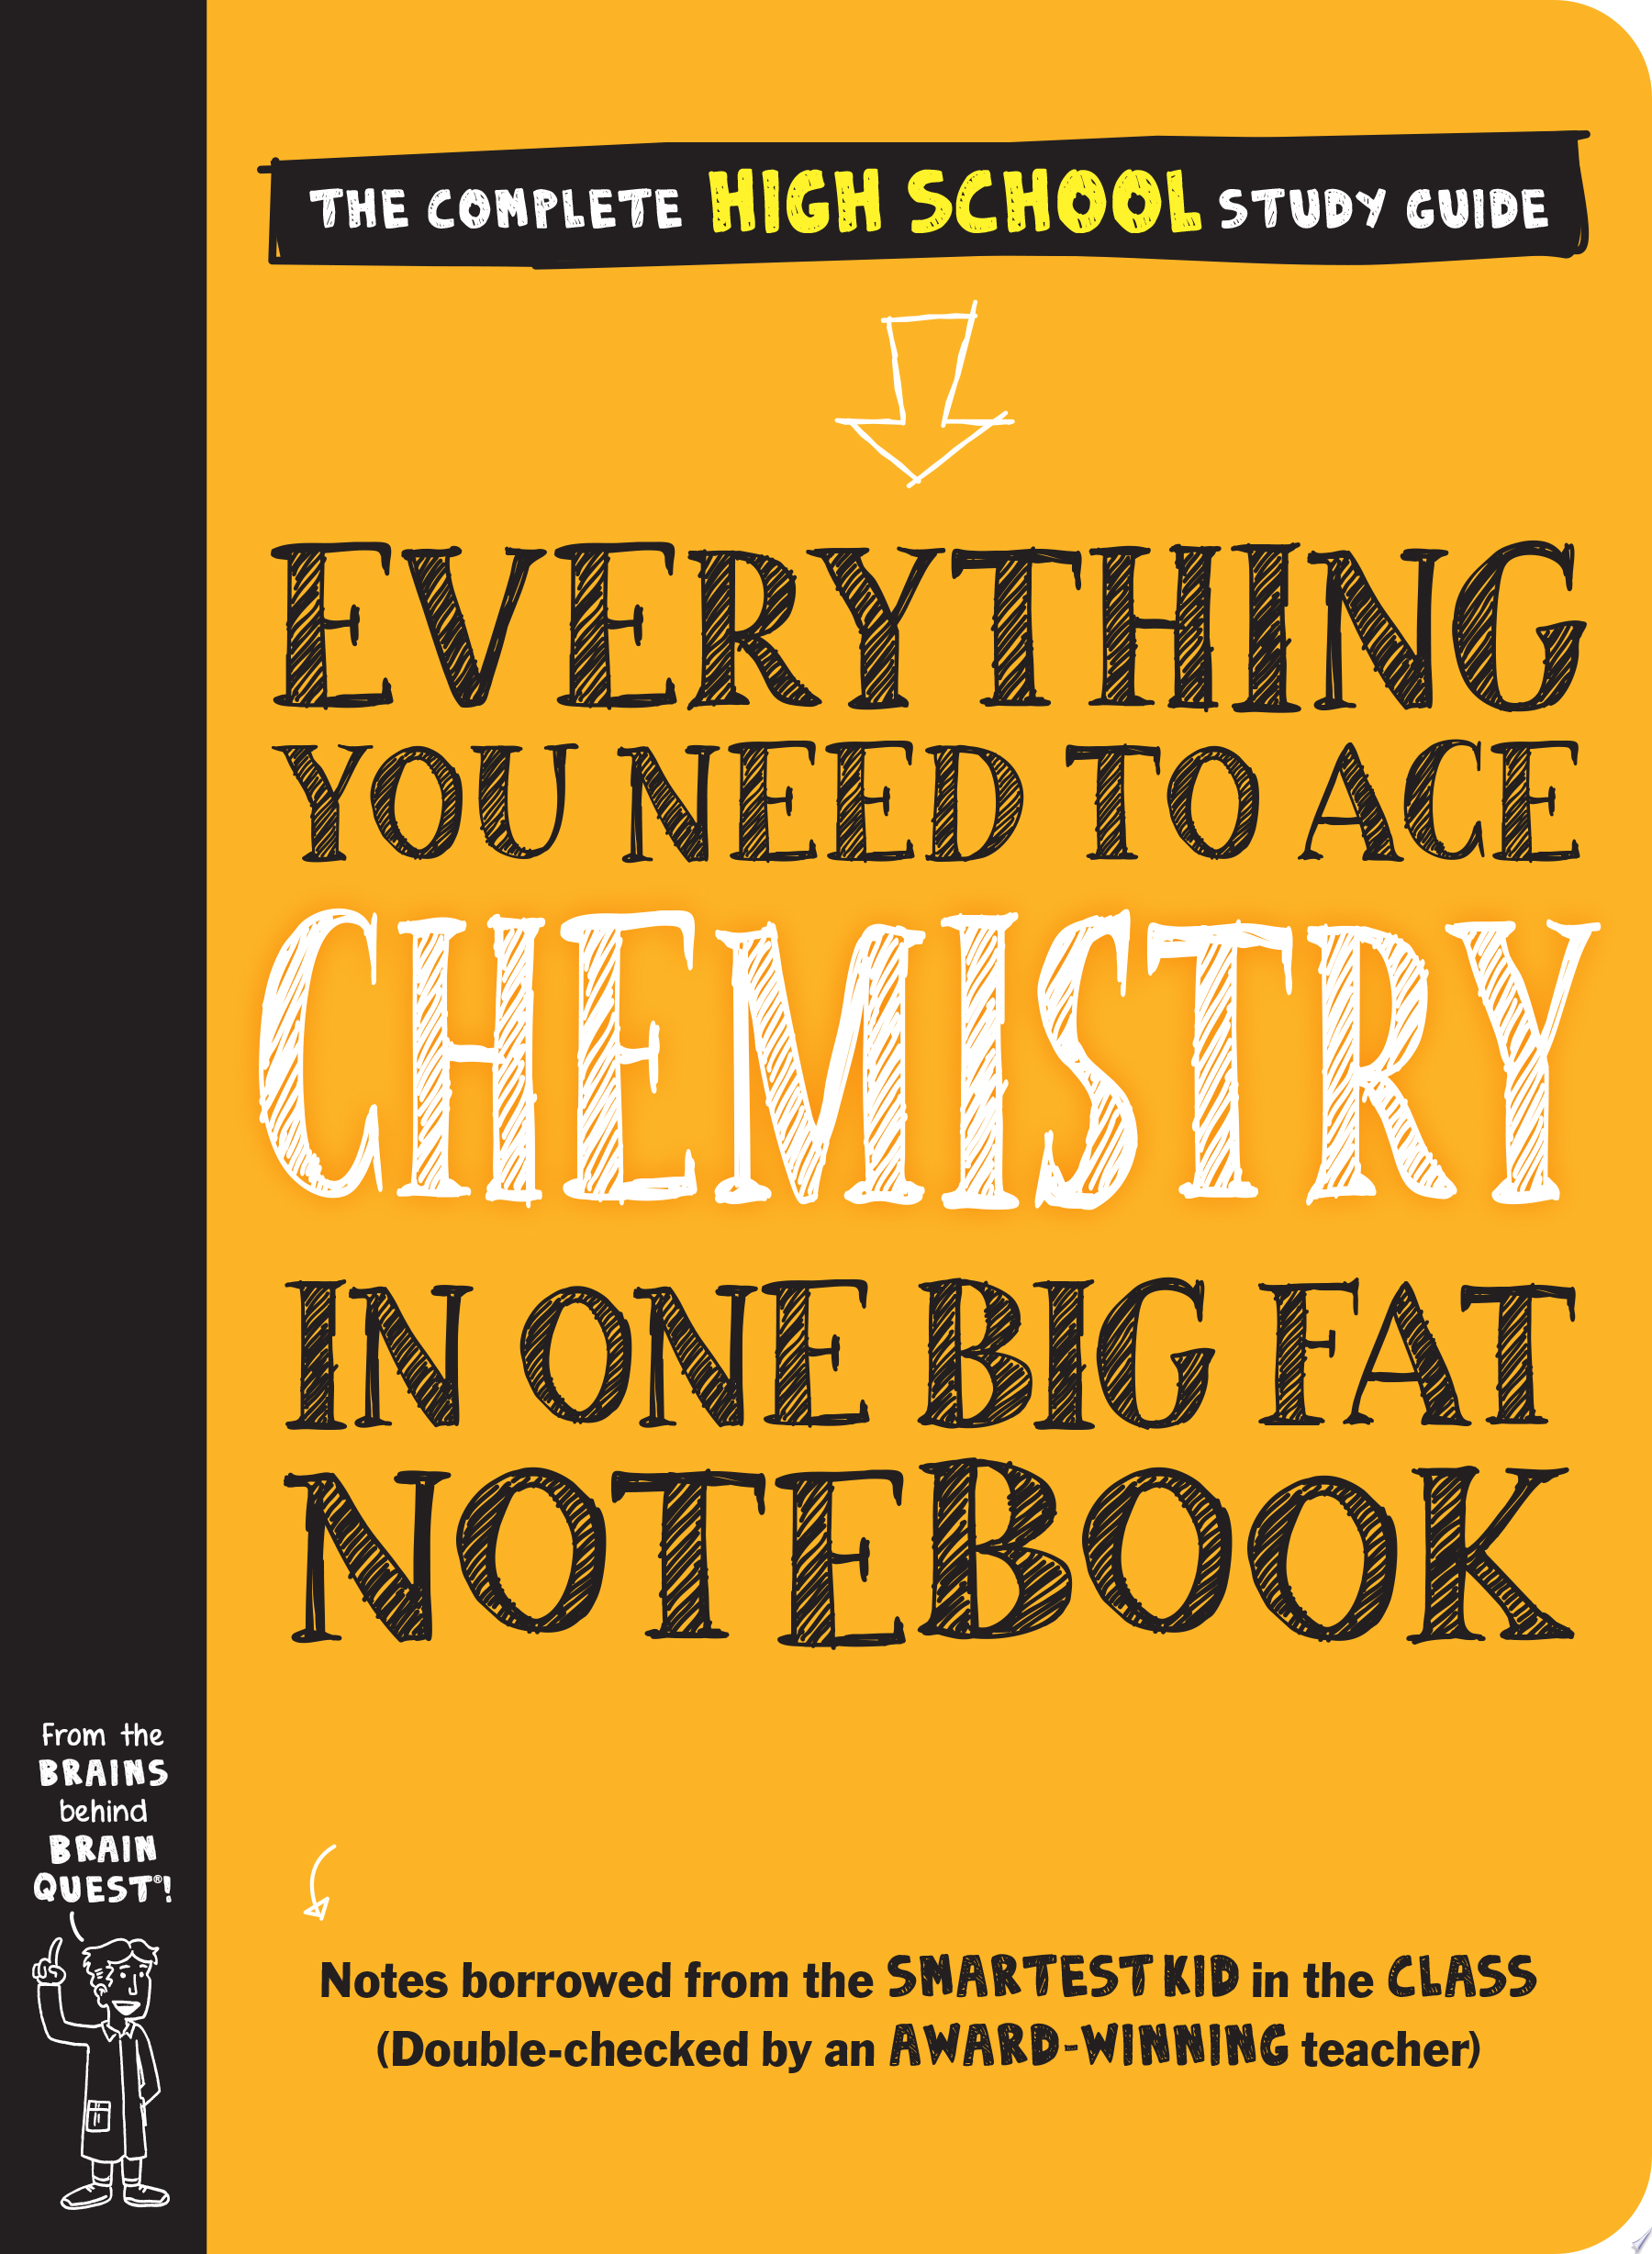 Image for "Everything You Need to Ace Chemistry in One Big Fat Notebook"